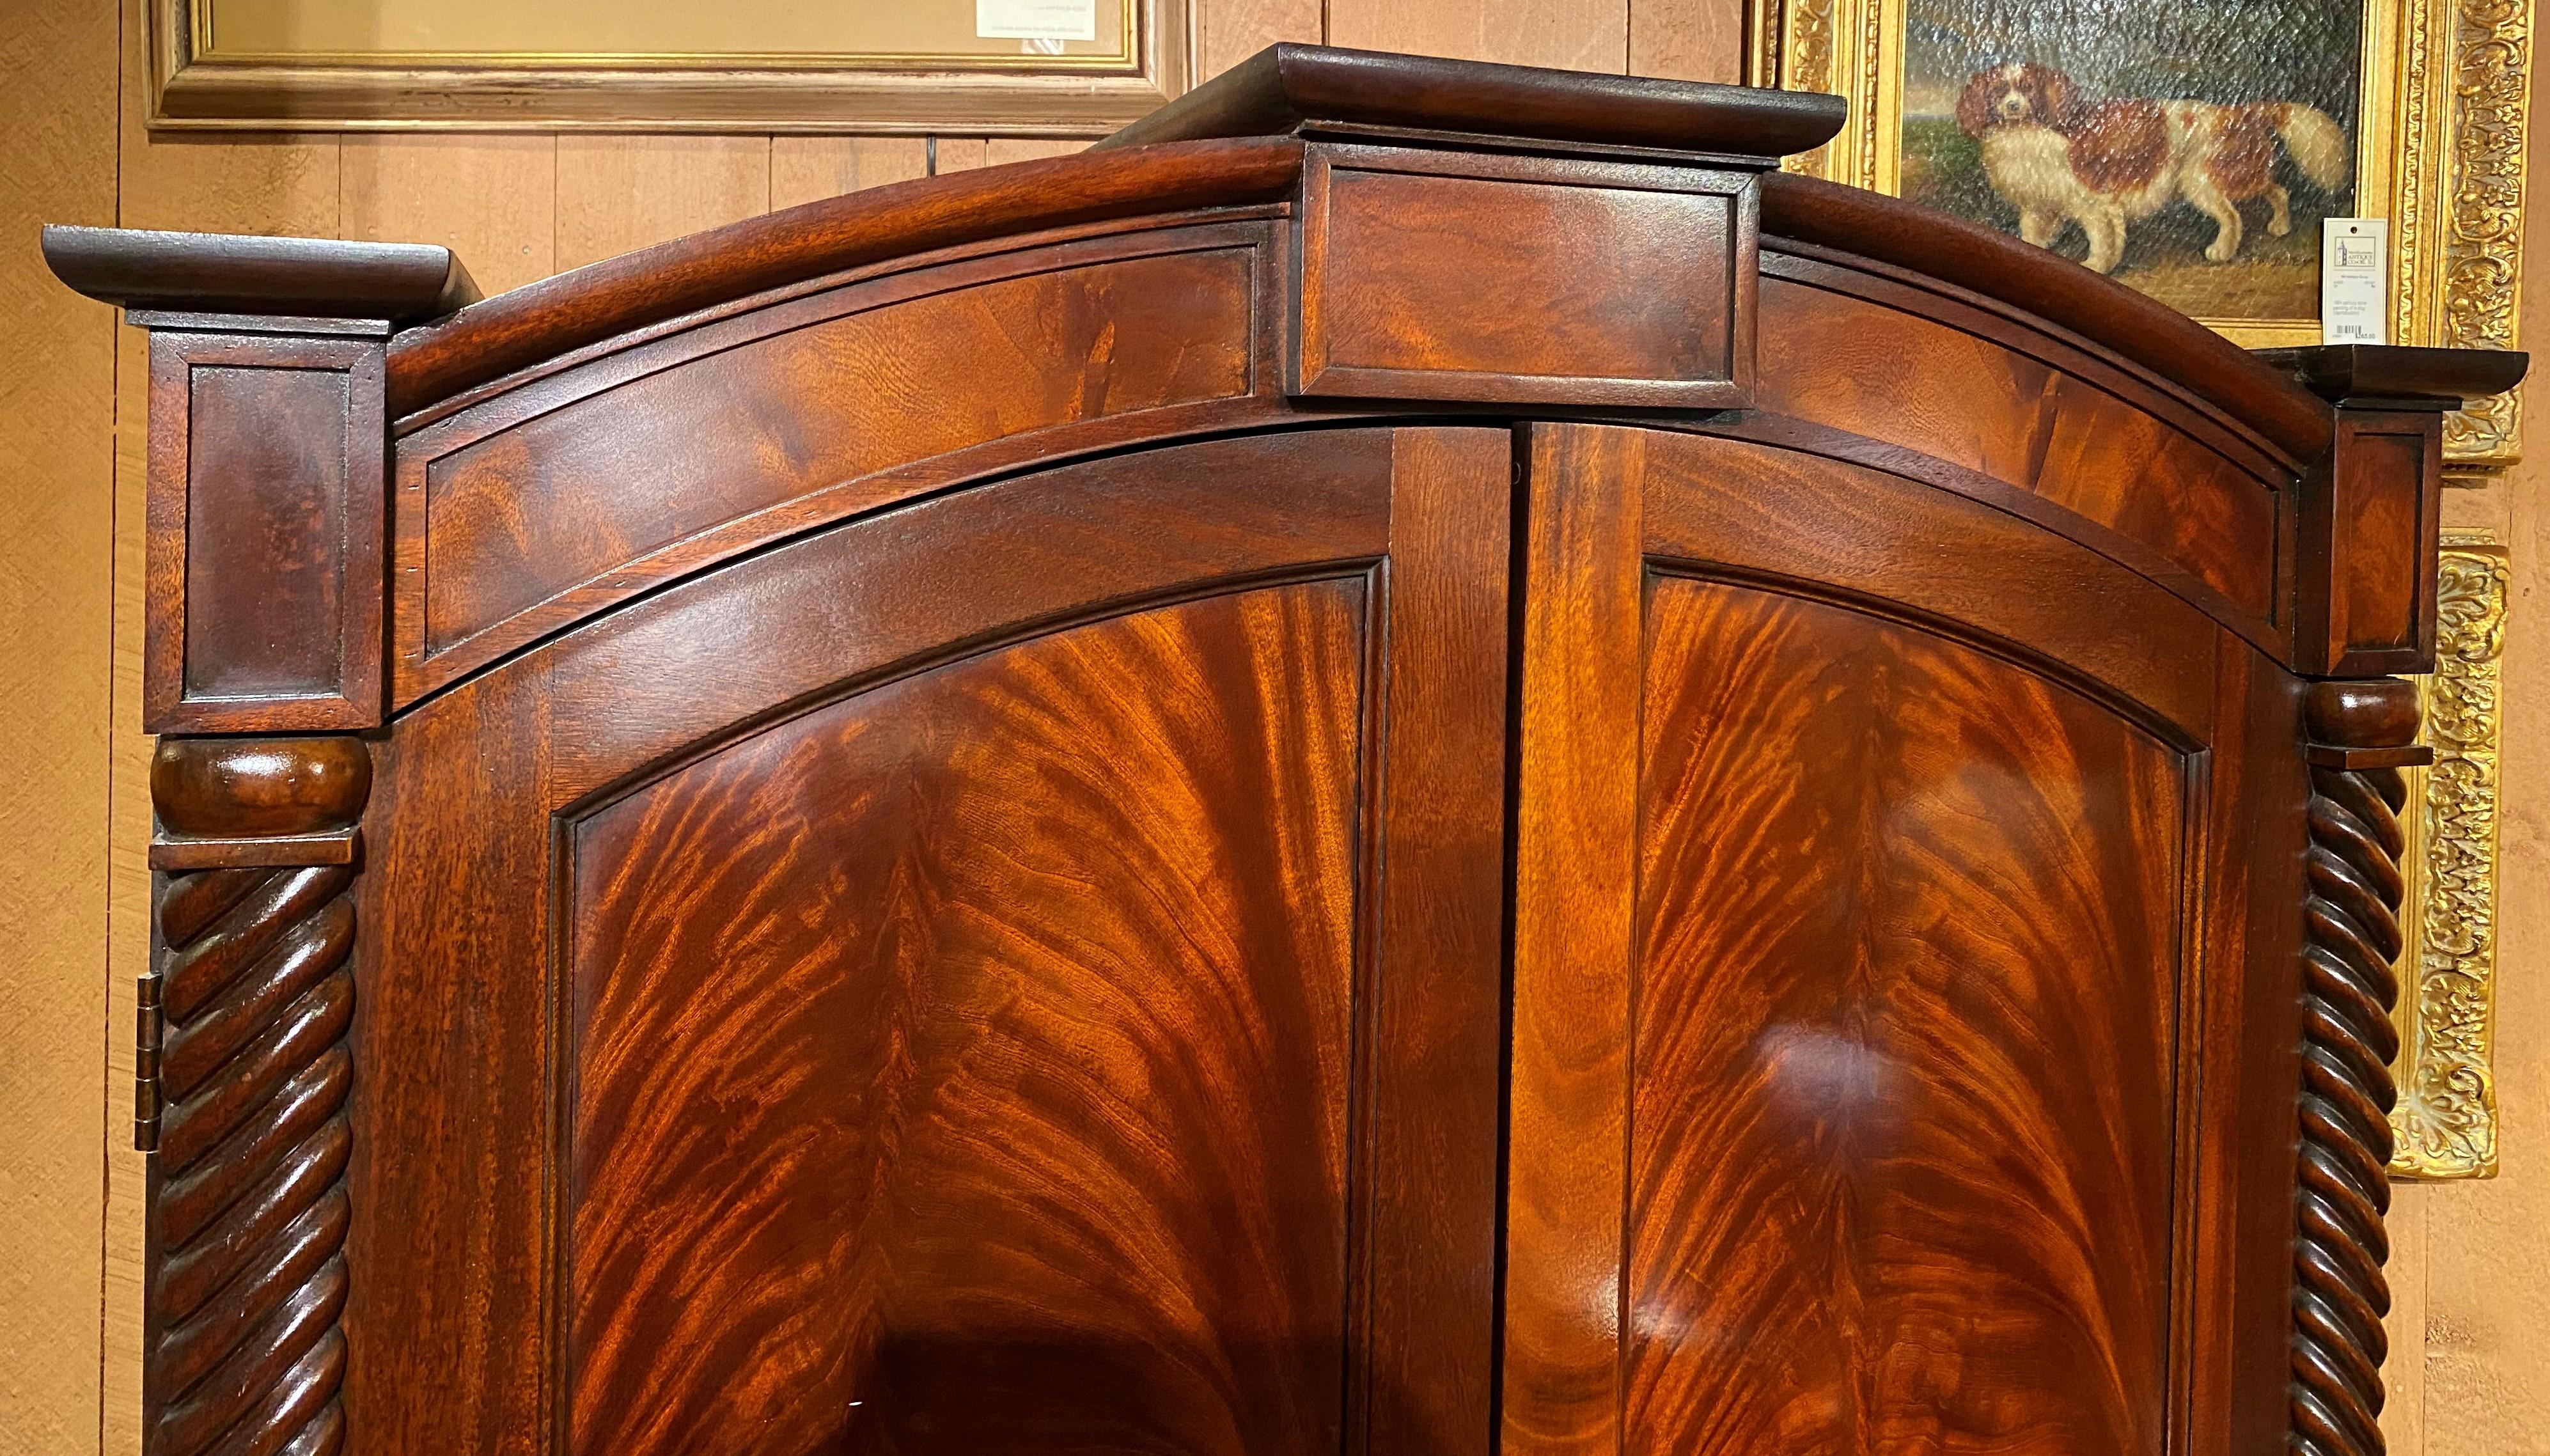 A fine mahogany arched top banded armoire with two doors, opening to a fitted interior with an open upper half with cutout back, probably used as an entertainment center with television, over two center fitted drawers, over two flame mahogany